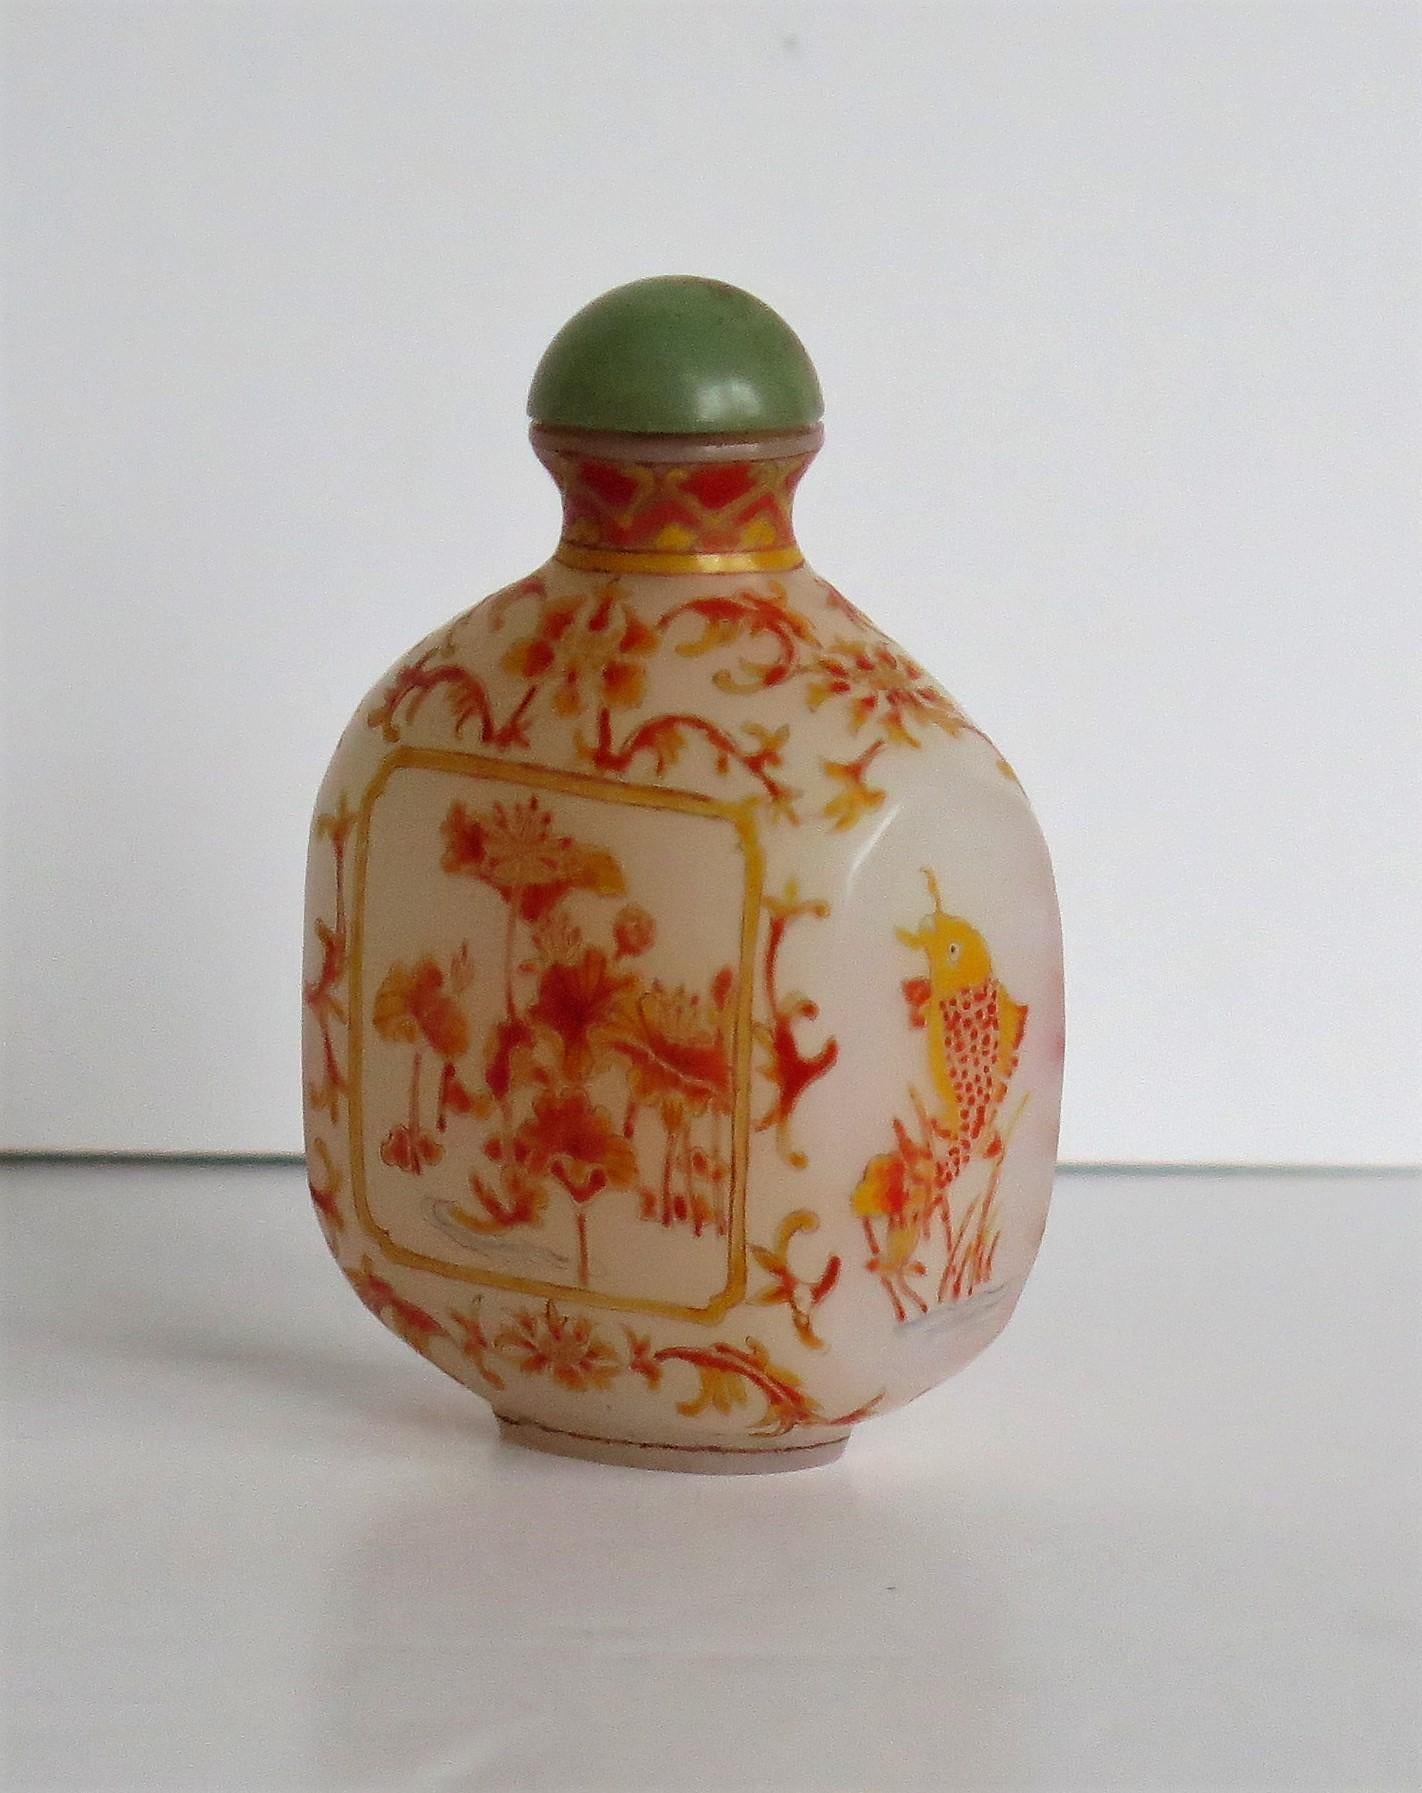 This is a very good Chinese glass snuff bottle, beautifully hand enameled, which we date to the earlier part of the 20th century, circa 1920 or possibly earlier

It is made of a milky white opaque glass and sits on a low oval foot. The bottle has